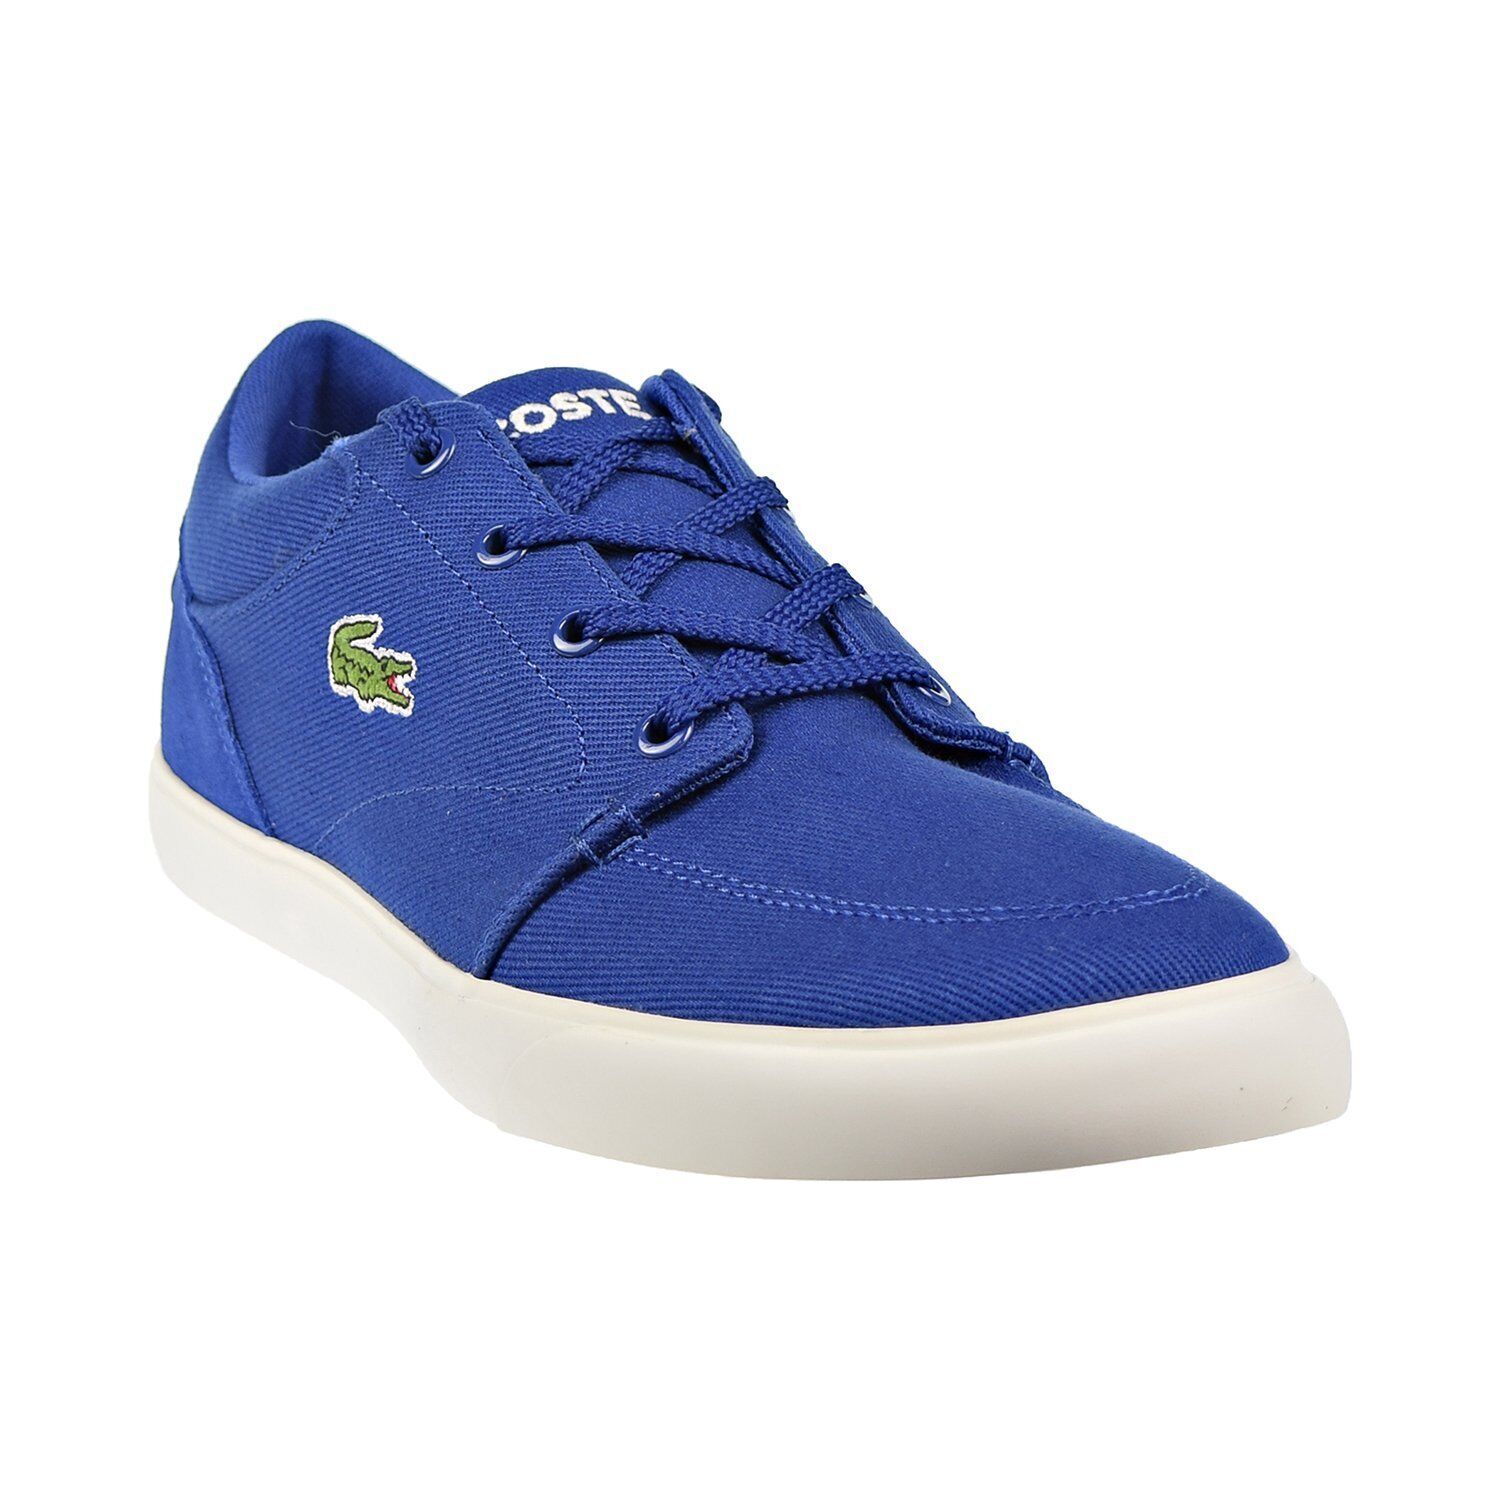 Primary image for Lacoste Men Casual Fashion Sneakers Bayliss 219 Size US 12 Dark Blue Canvas